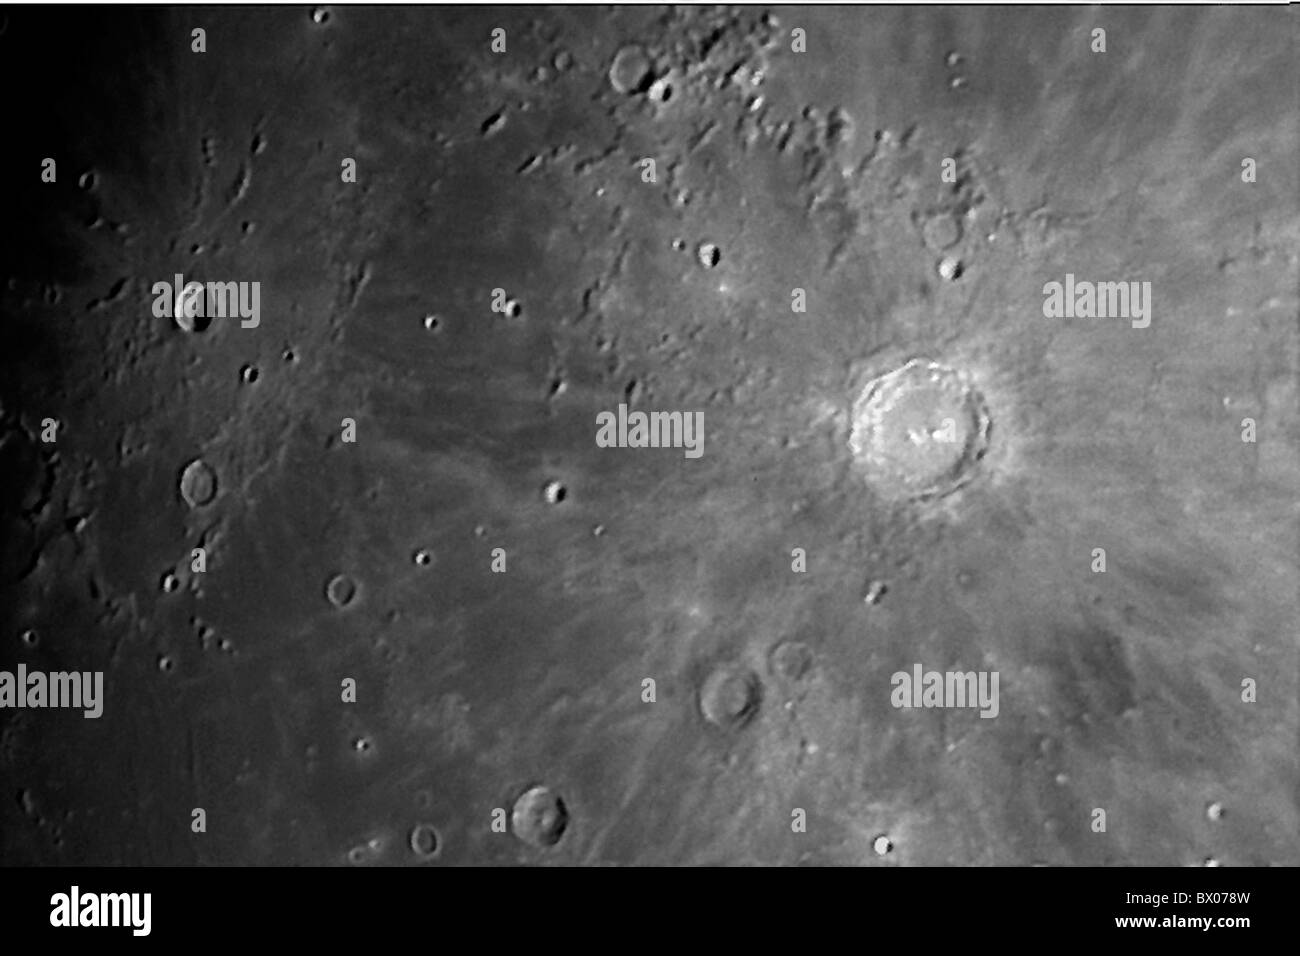 astronomy Copernicus detail Kopernikus crater moon lunar surface surface black and white Stock Photo